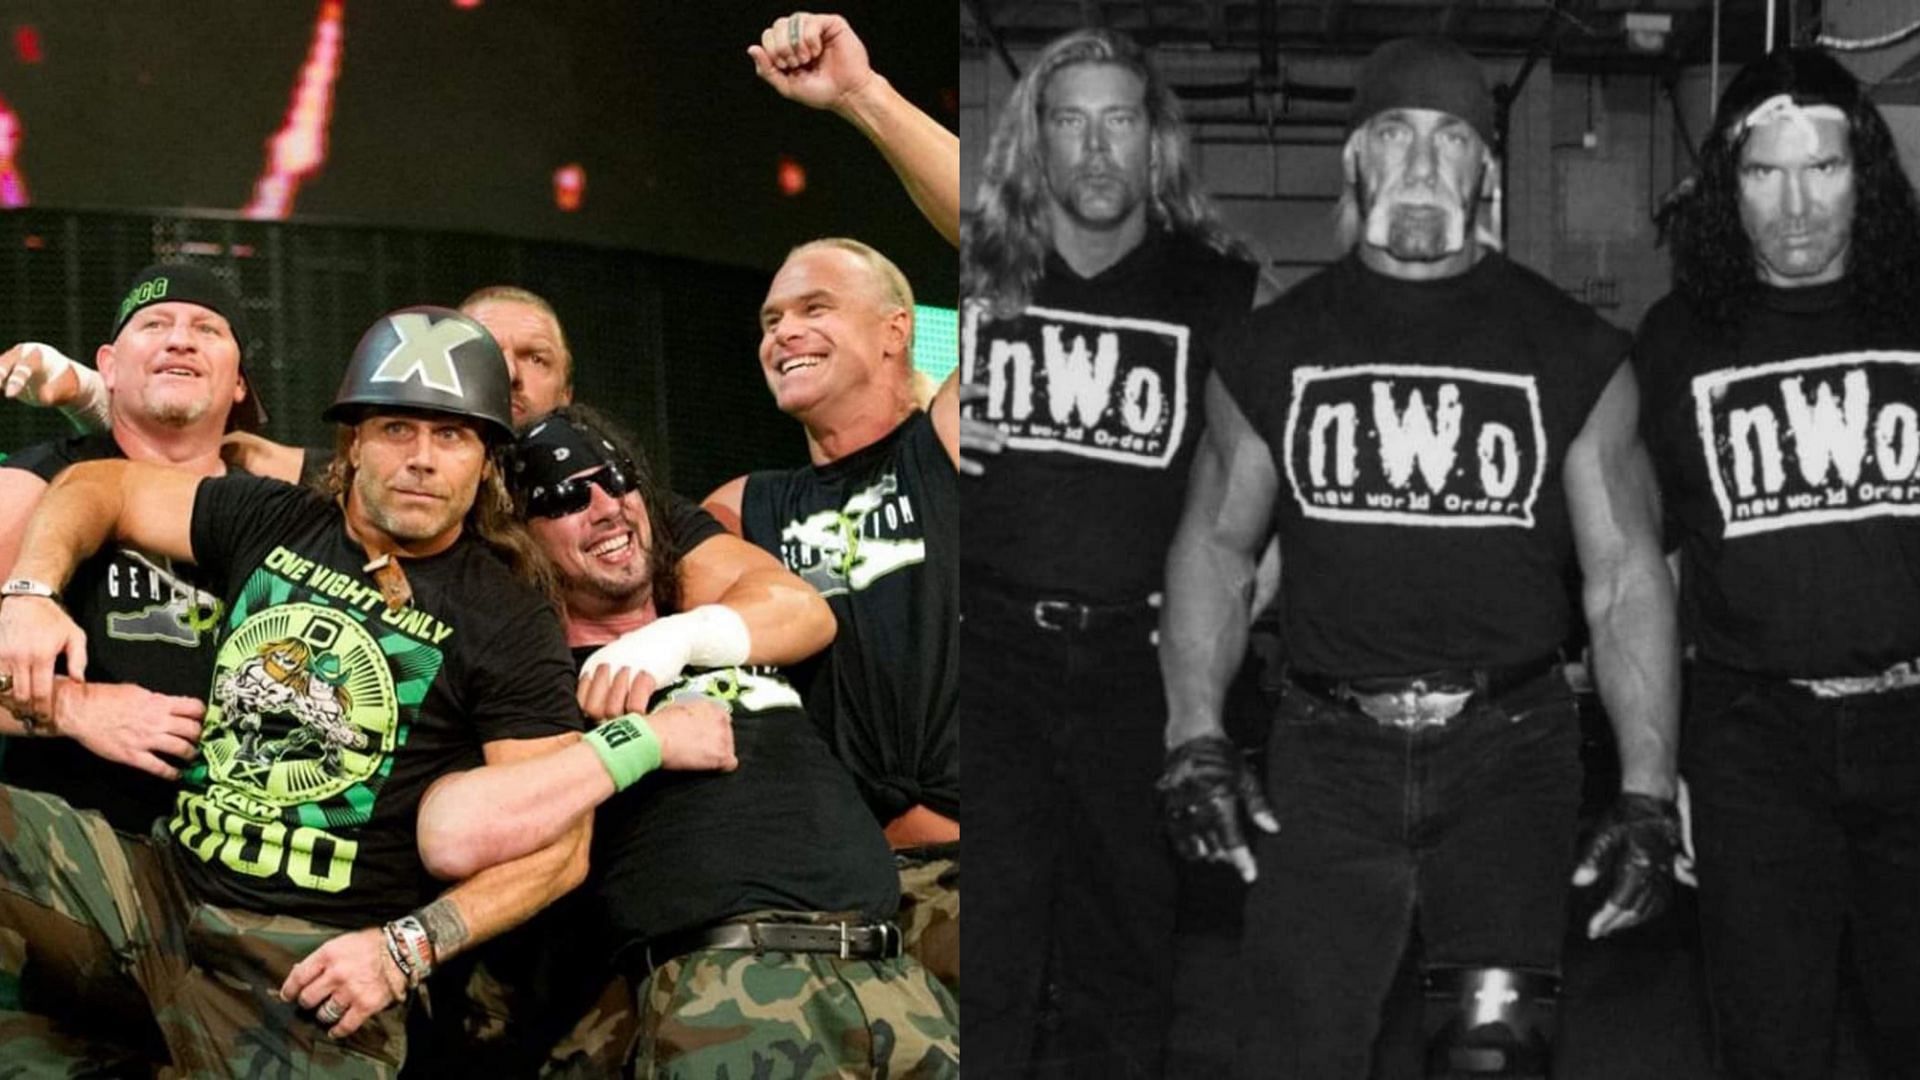 DX and NWO defined the iconic Monday Night Wars of the 90s